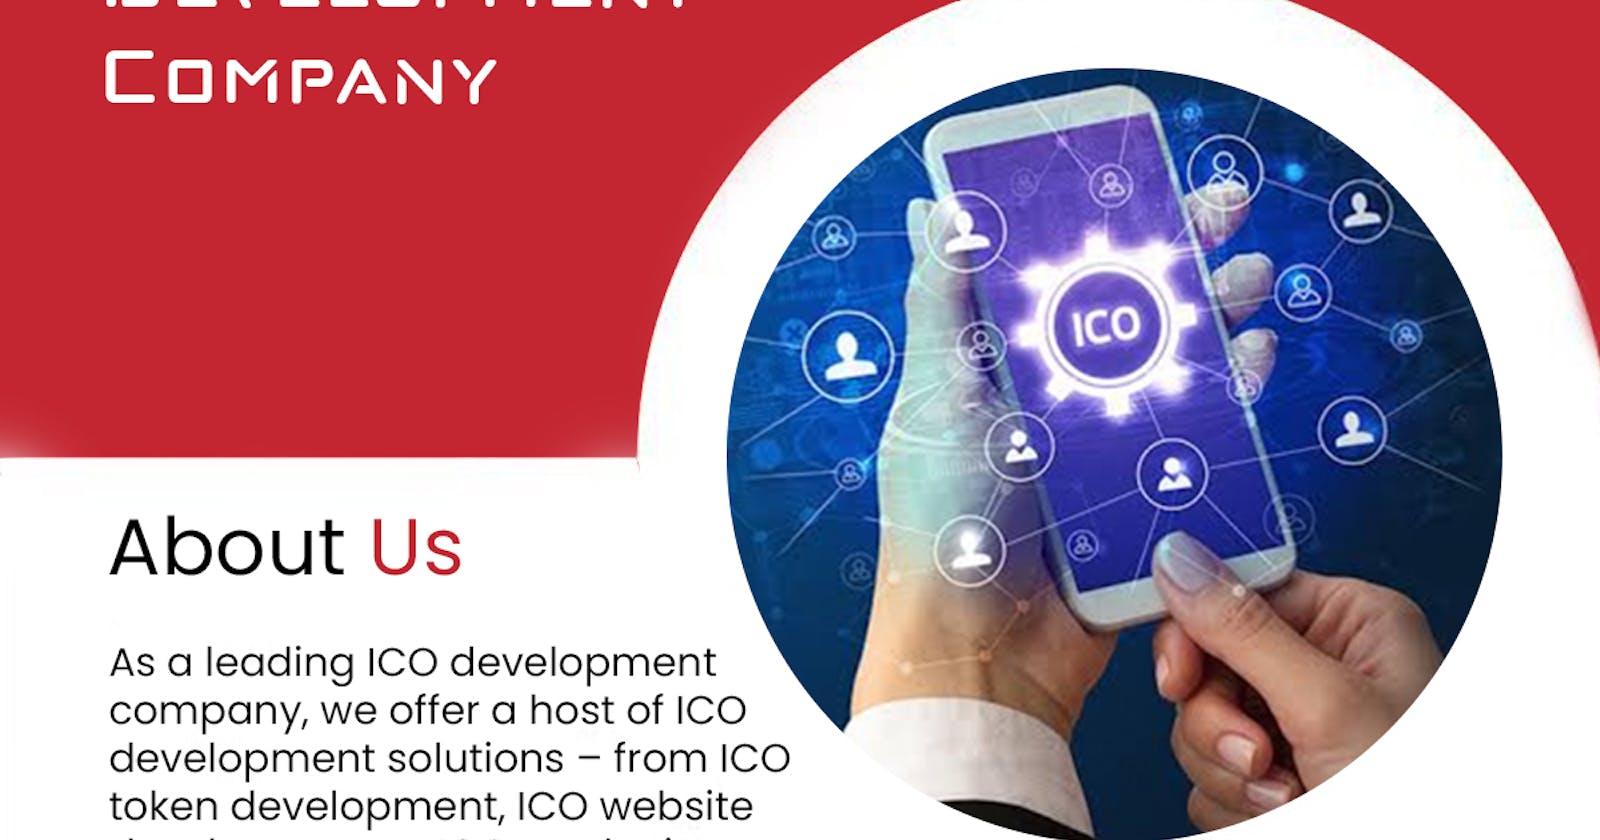 Get your Digital Token developed with the emerging ICO development company for high quality Tokens